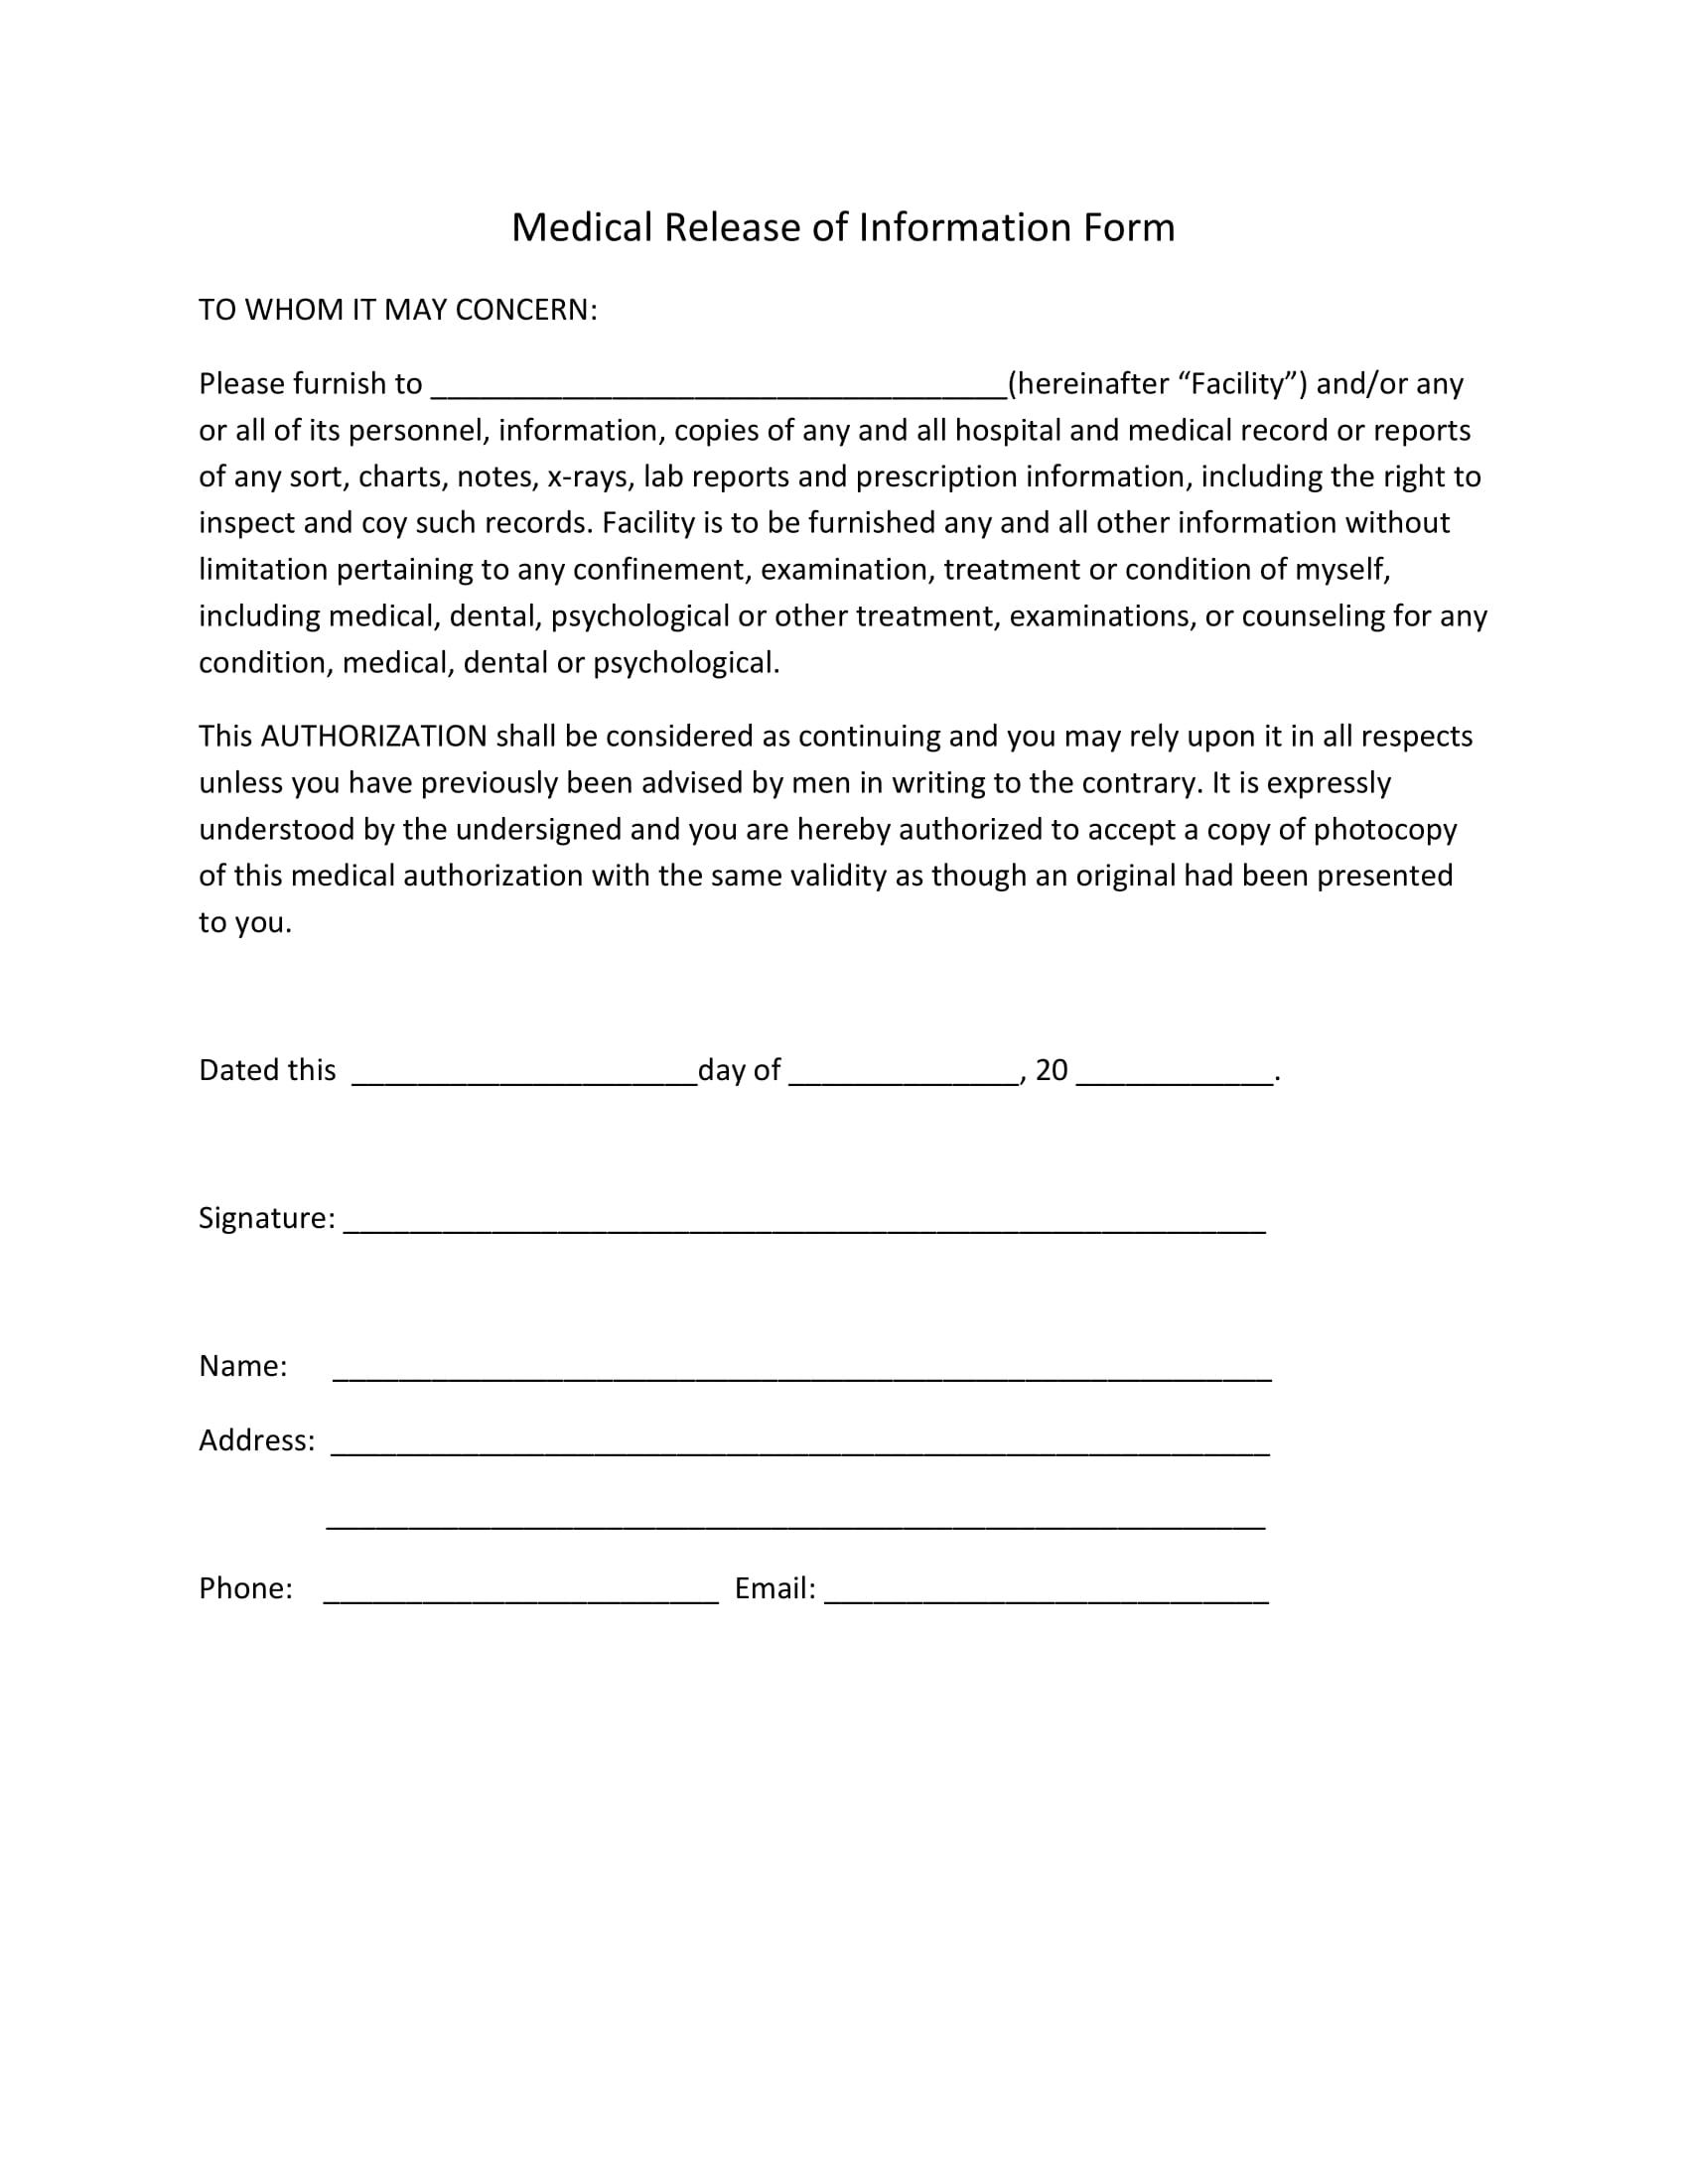 Medical Release of Information Form for Personal Trainer